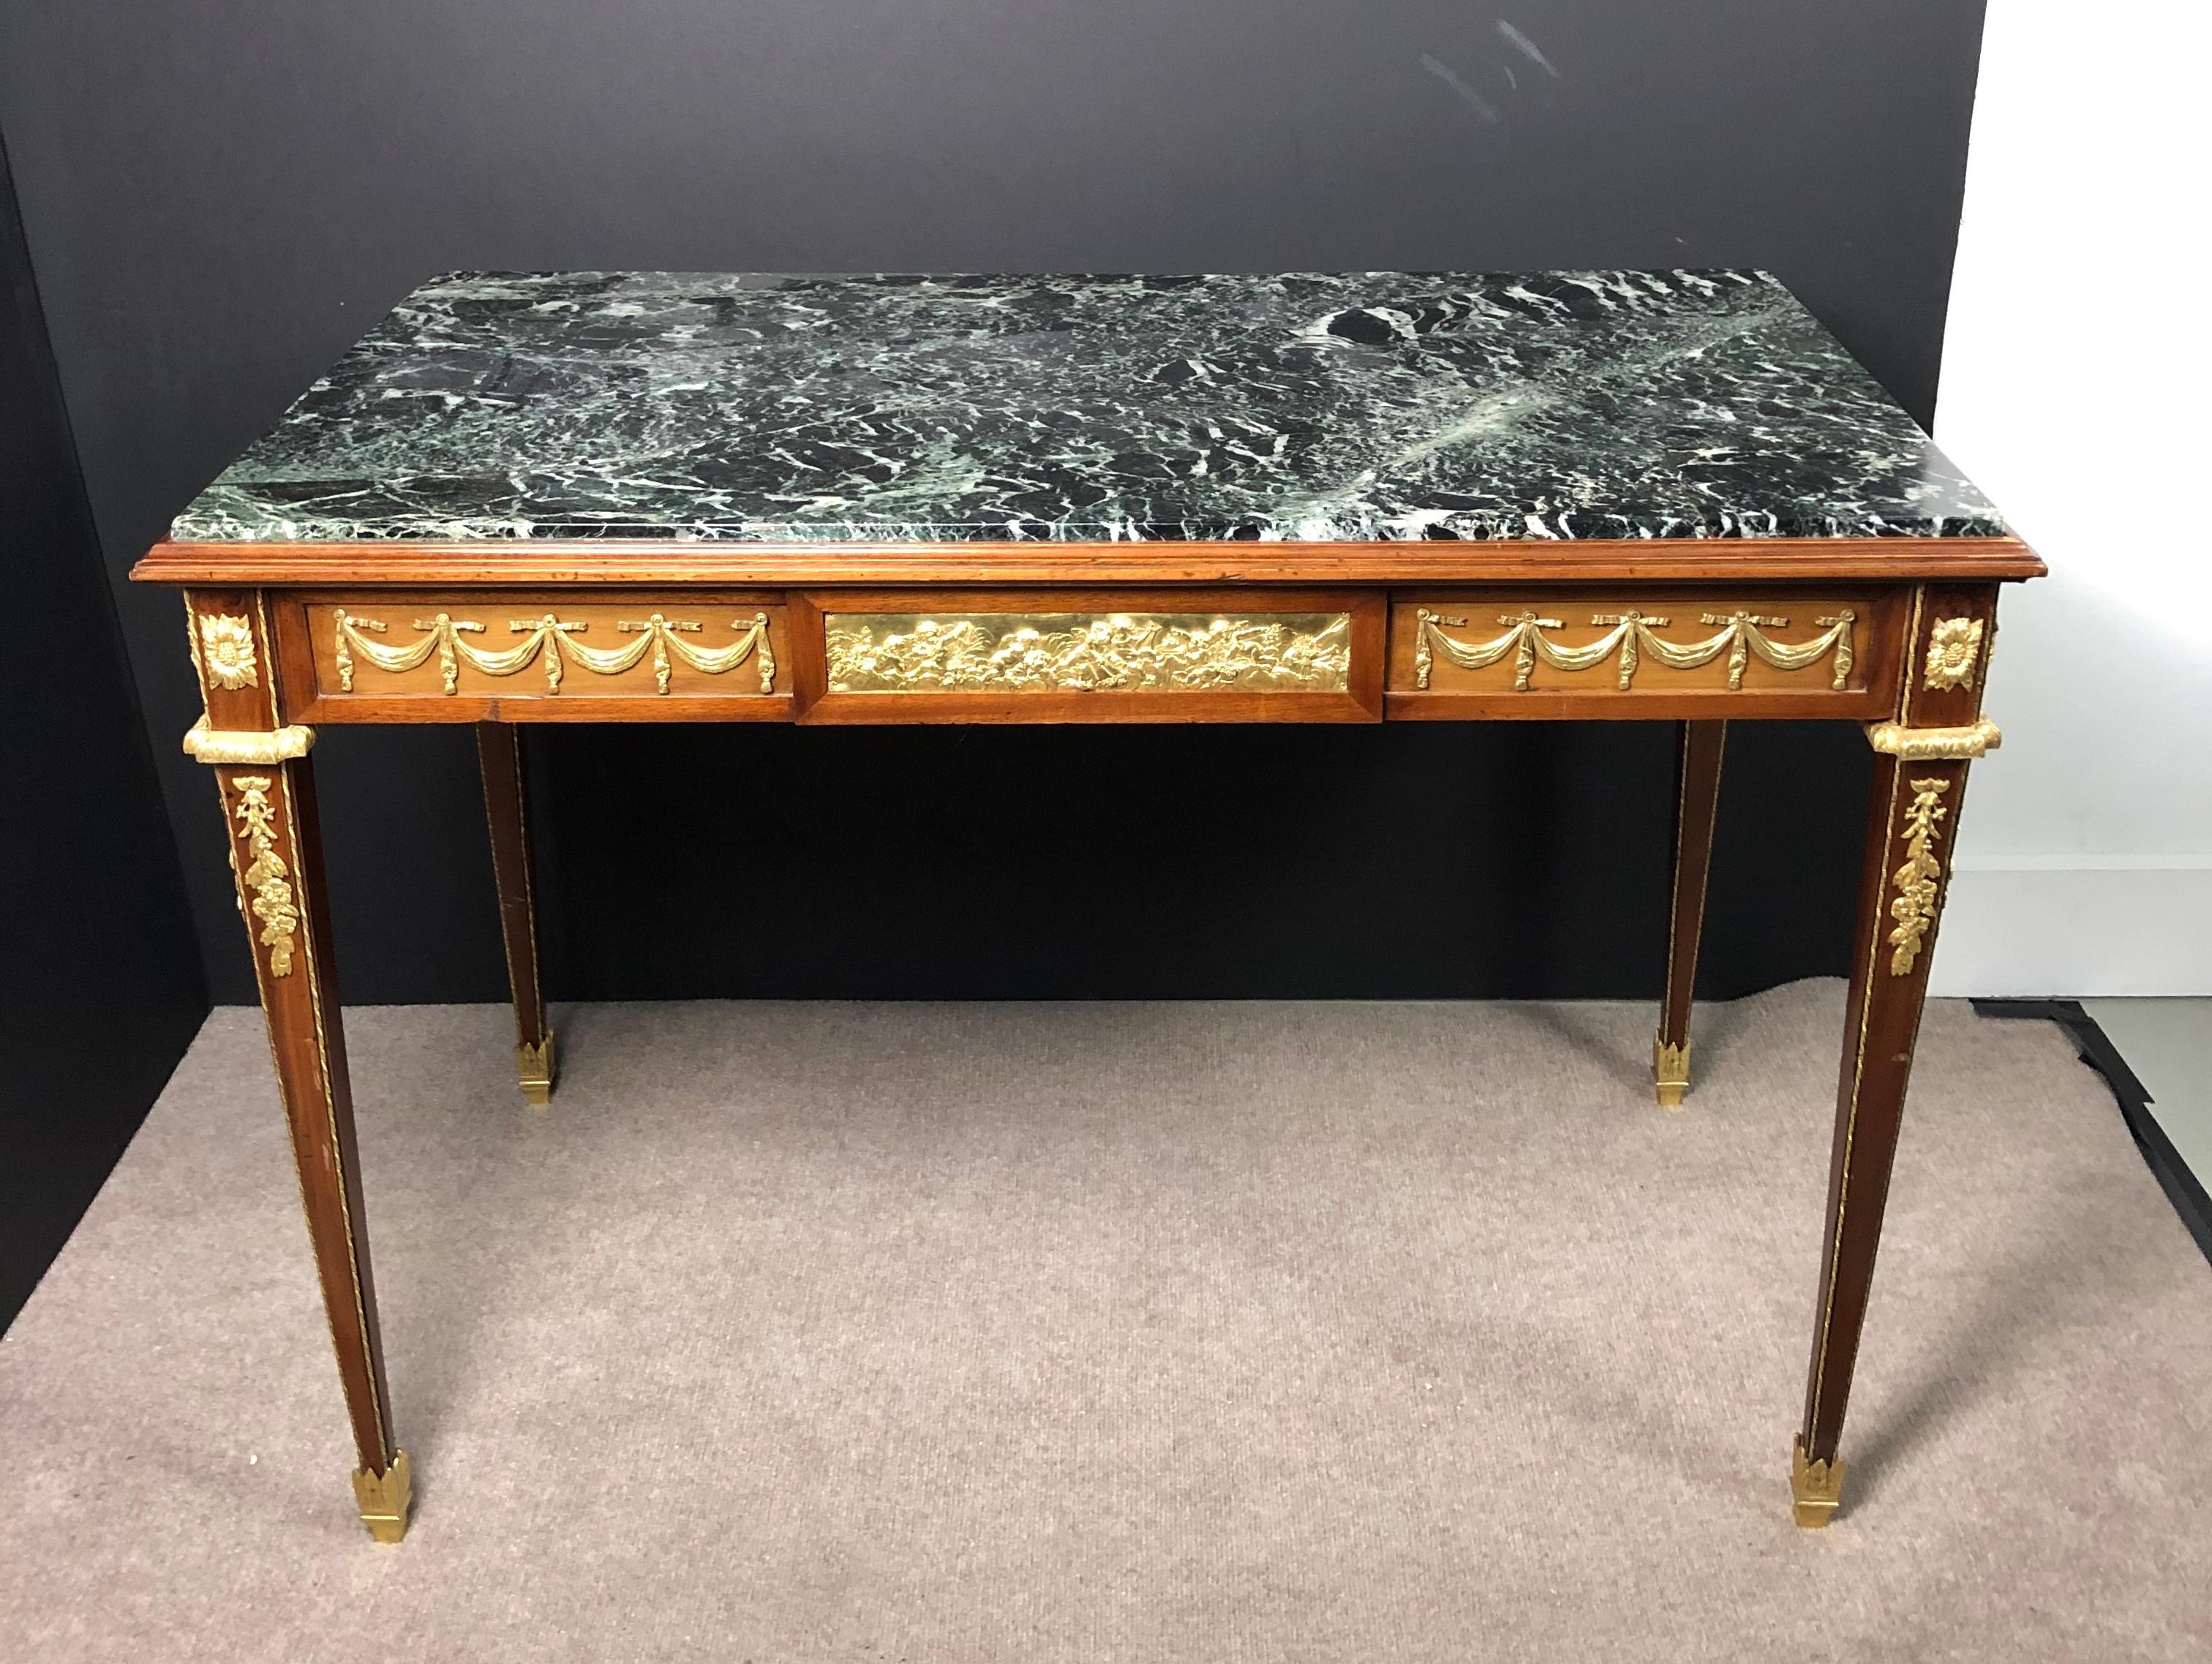 Signed L. Kahn Louis XVI style green marble-top Doré bronze mounted library table, 19th century Louis XVI marble top Doré bronze mounted writing table. Green and white marble top desk with signed gilt bronze mounts. Neoclassical style. Table has